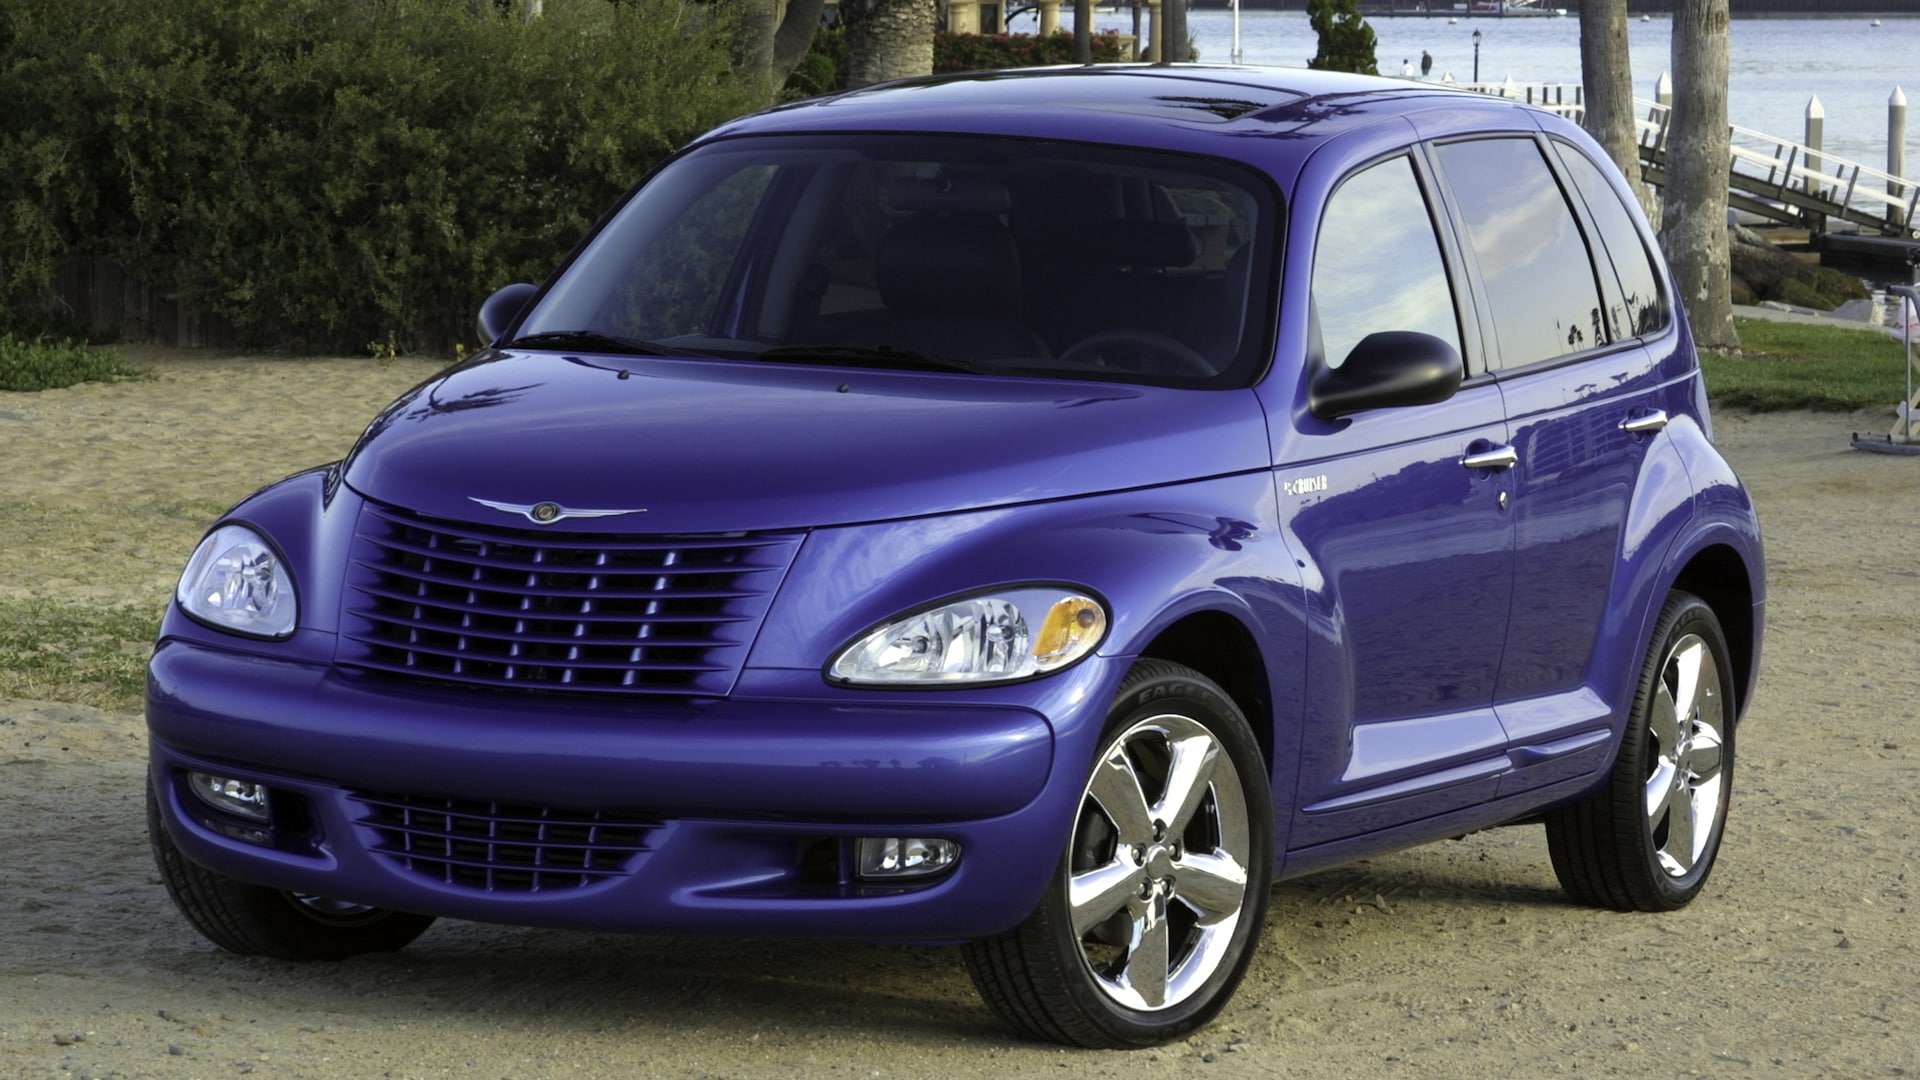 The Chrysler PT Cruiser: History, Buying Tips, Auctions, Photos, and More